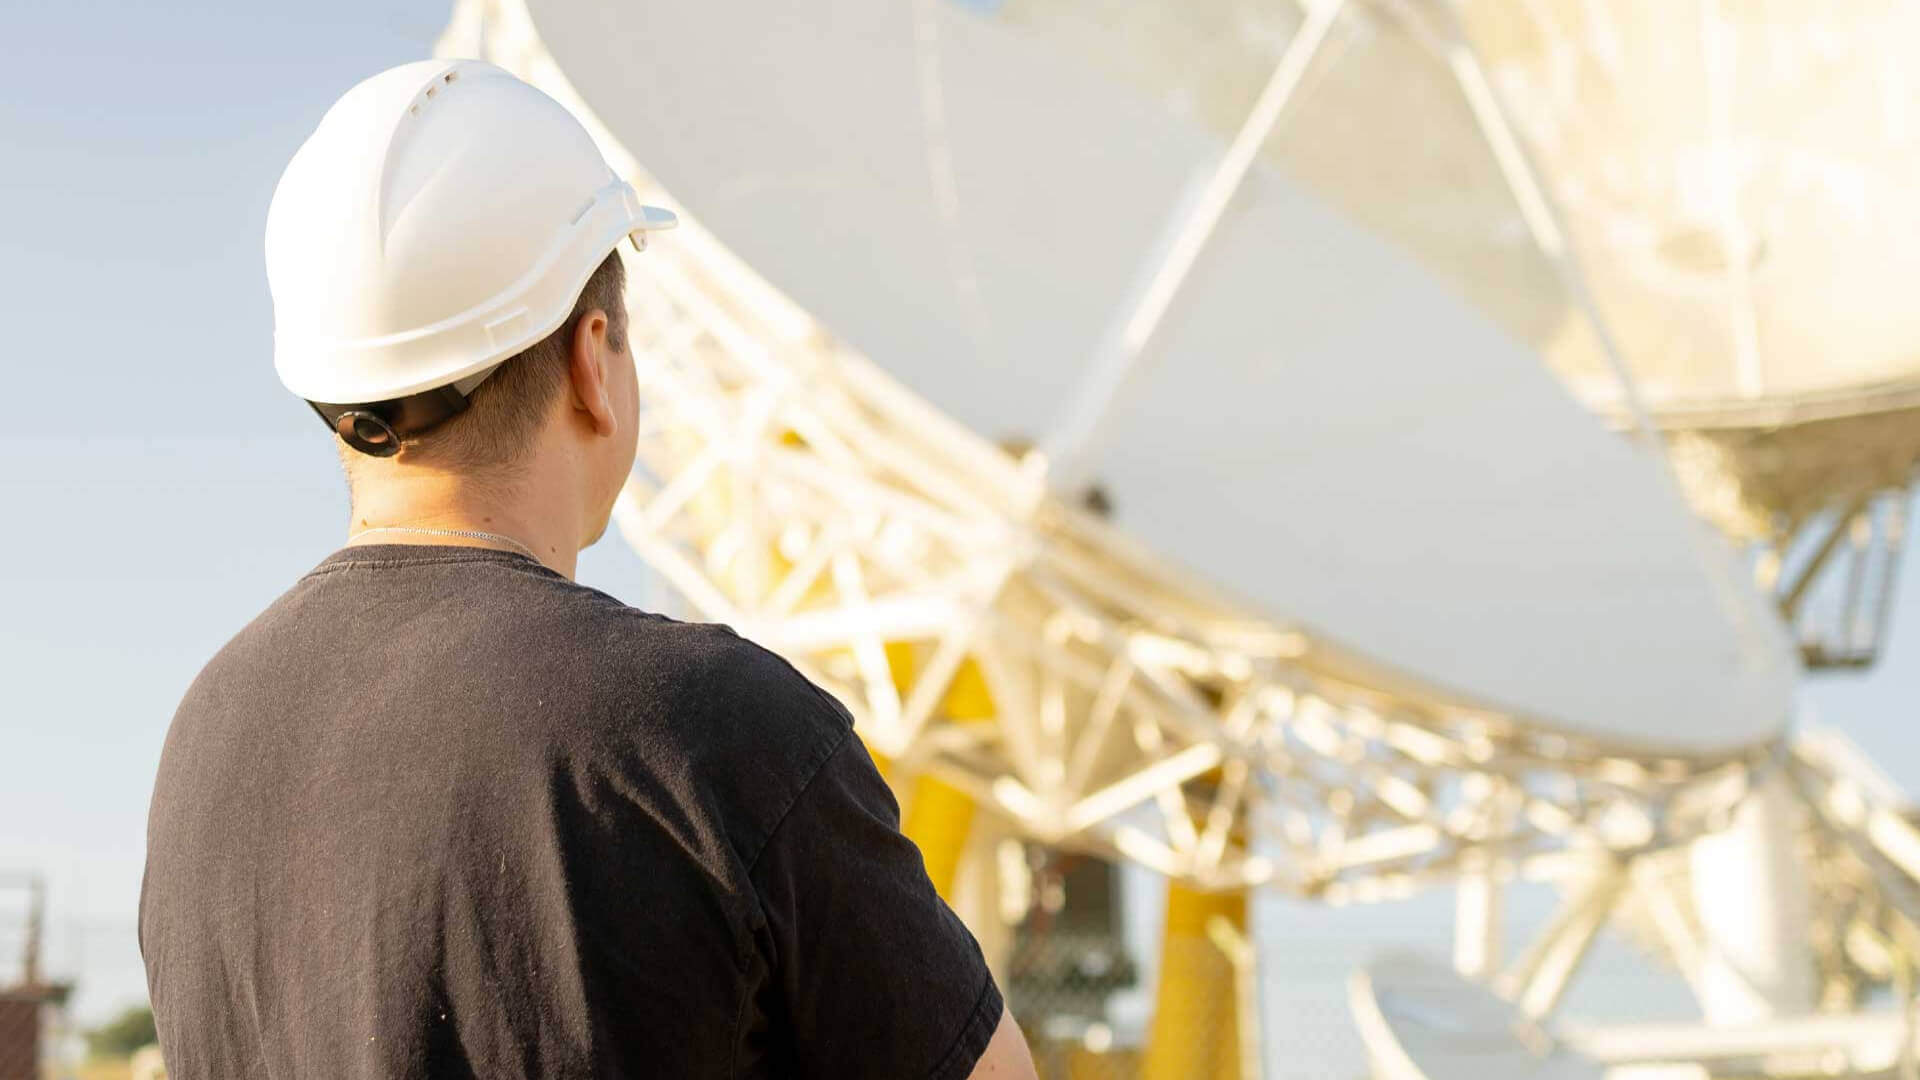 Technician with his back turned in front of a large telecommunications antenna